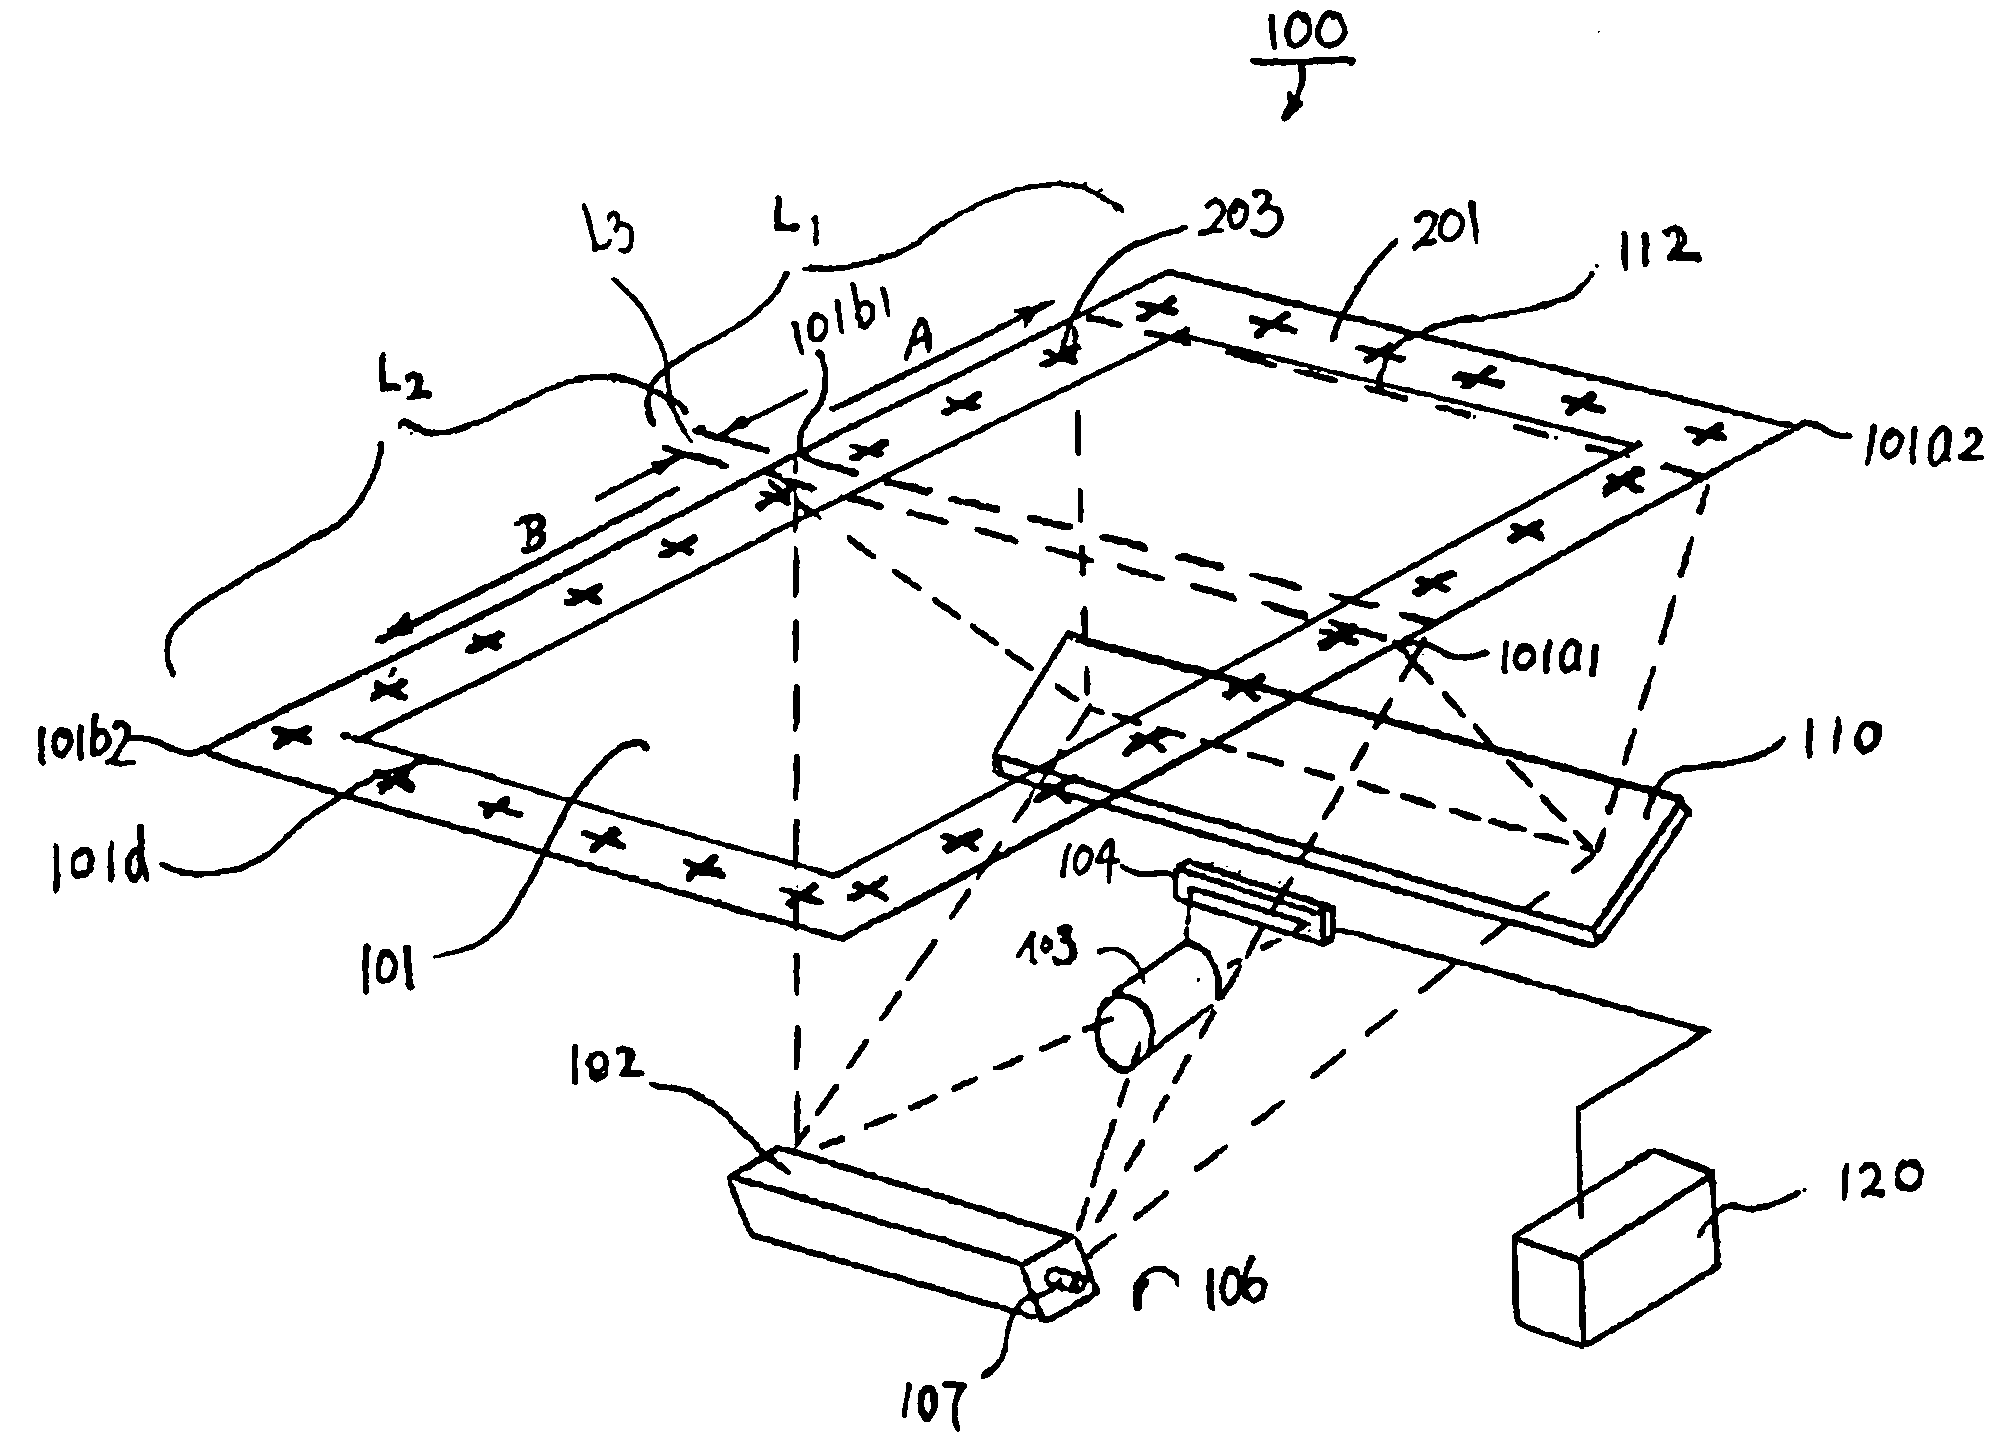 Fast scanner with rotatable mirror and image processing system